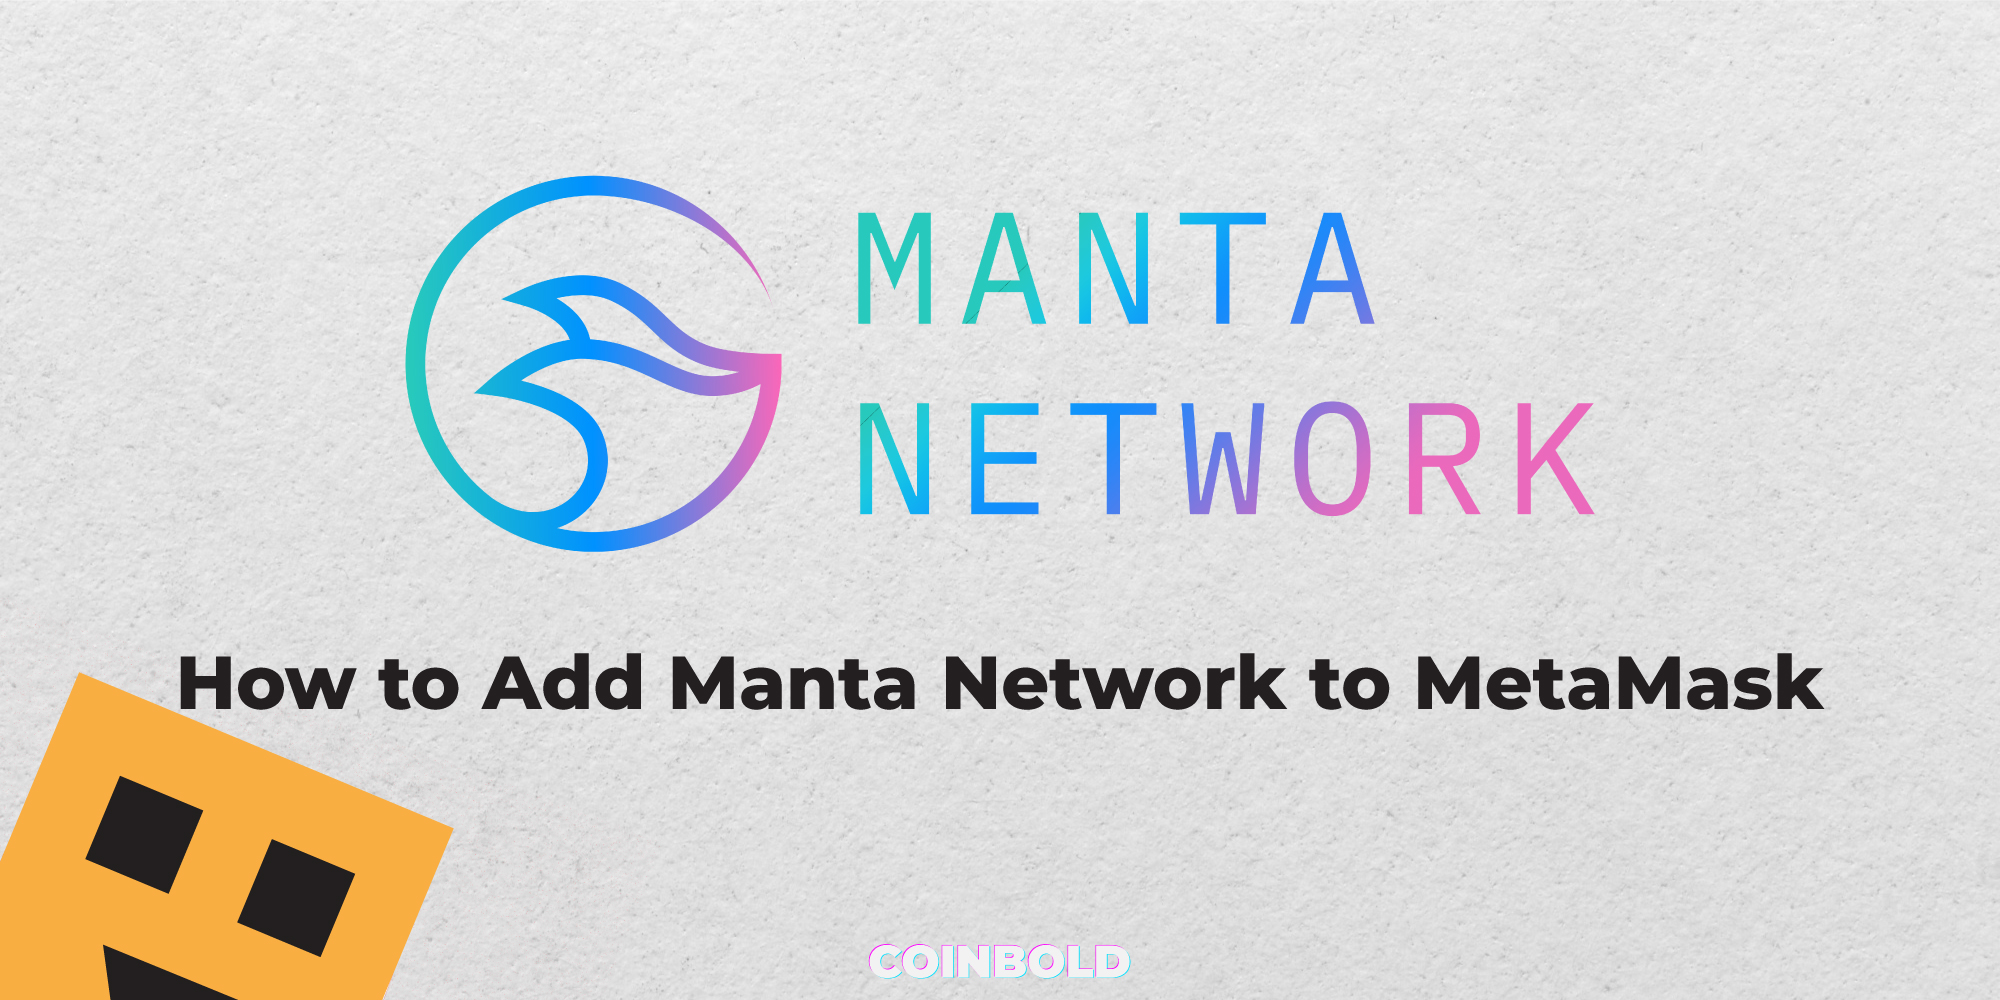 How to Add Manta Network to MetaMask